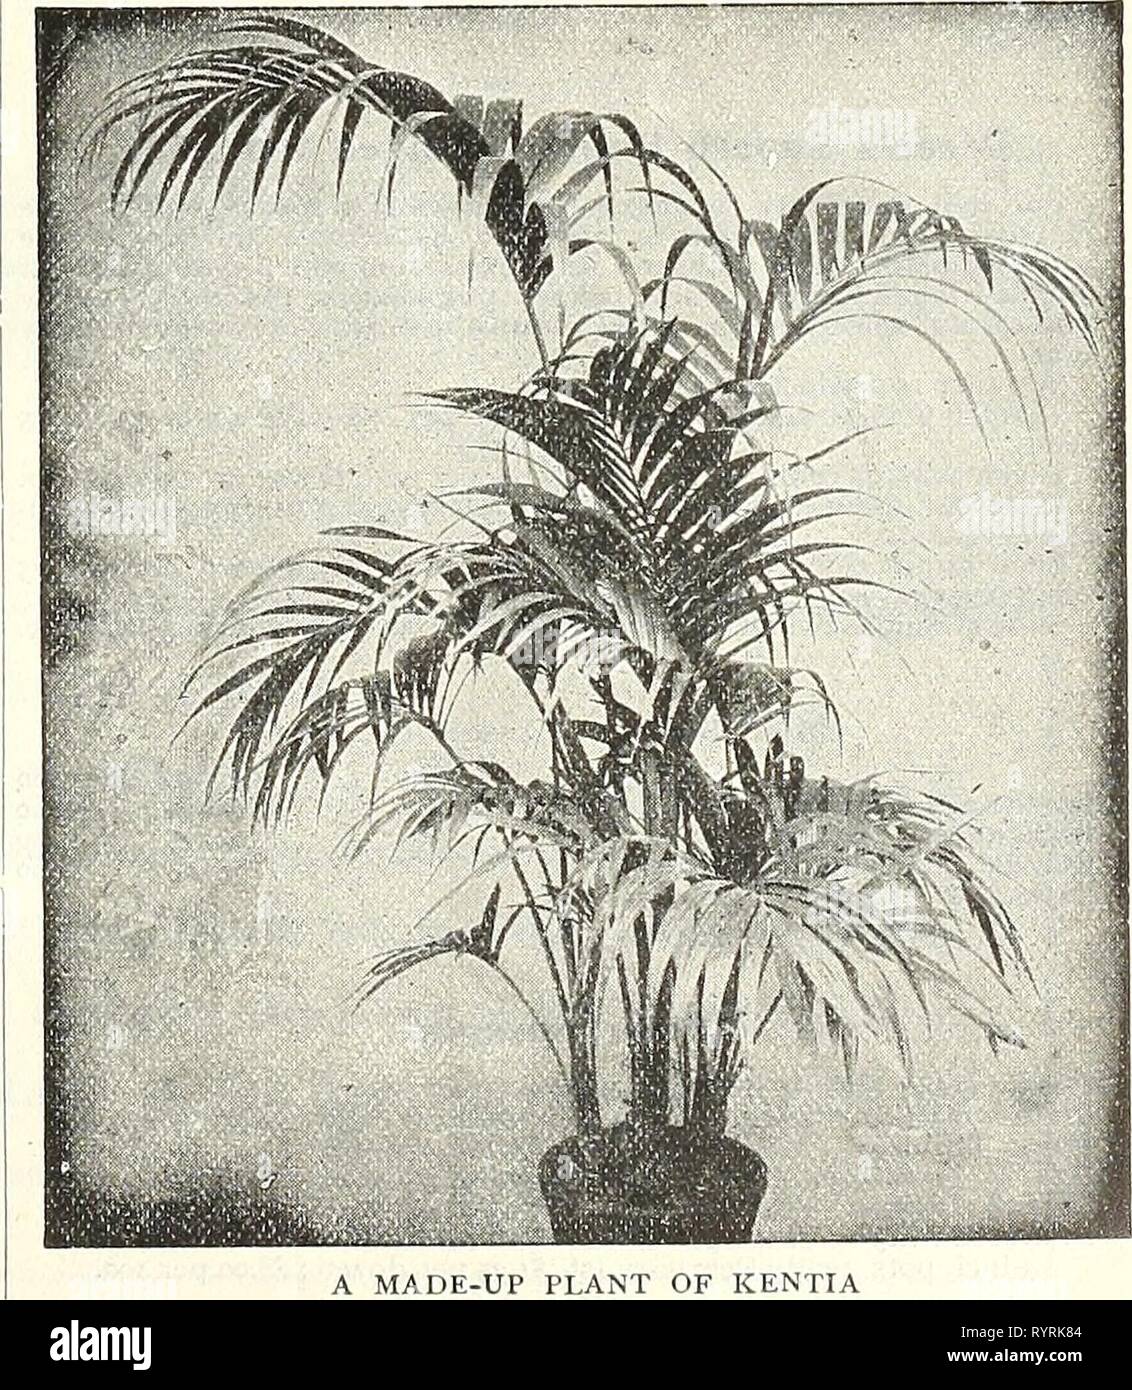 Dreer's wholesale price list  Dreer's wholesale price list : seeds for florists plants vegetable seeds, tools, fertilizers, sundries, etc . dreerswholesalep1908henr 1 Year: 1908  PHCENTX CANARIENSIS Phoenix Reclinata. 6-inch pots, 18 to 20 inches high, 85 cents each ; $9.00 per dozen. 8 ' tubs, 24 ' ' $2.00 each. Pinanga Kuhlii. Good 4-inch pot plants of this rare Palm, 15 in. high, 75 cts. each. Rhopaloblaste Hexandra. A rare Palm with very graceful foliage, somewhat like Cocos Wed- deliana in general appearance. Very handsome. 3-inch pots, 12 in. high, $1.00 each. Stevensonia Grandifolia. A  Stock Photo